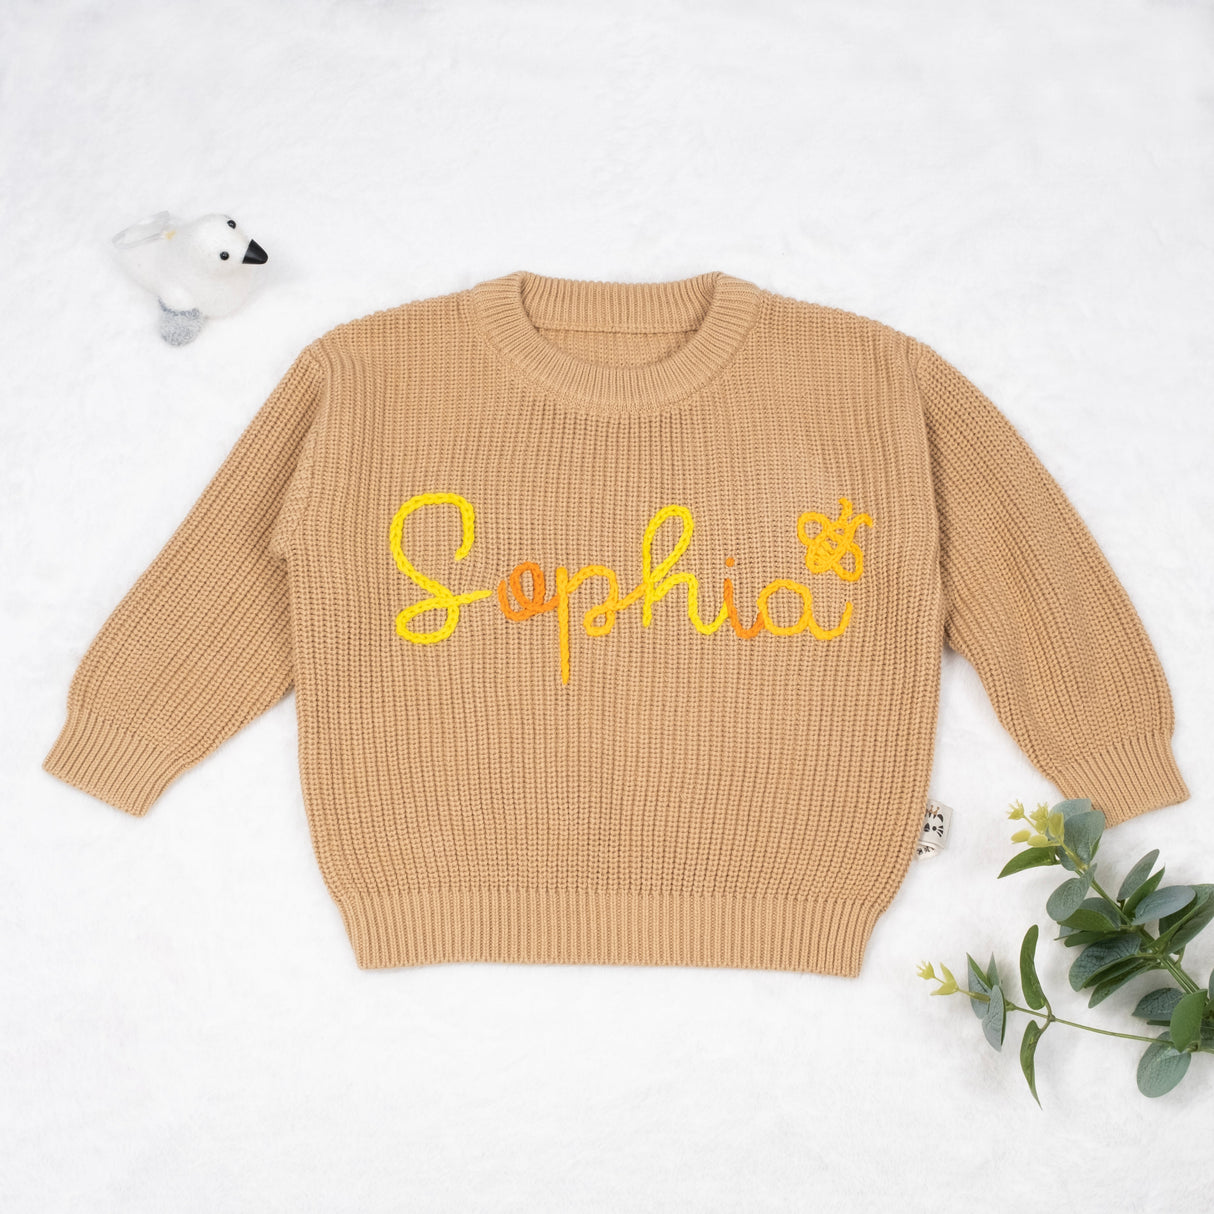 GEX Personalized Kids Sweaters with Name for 1th Birthday Gift - GexWorldwide